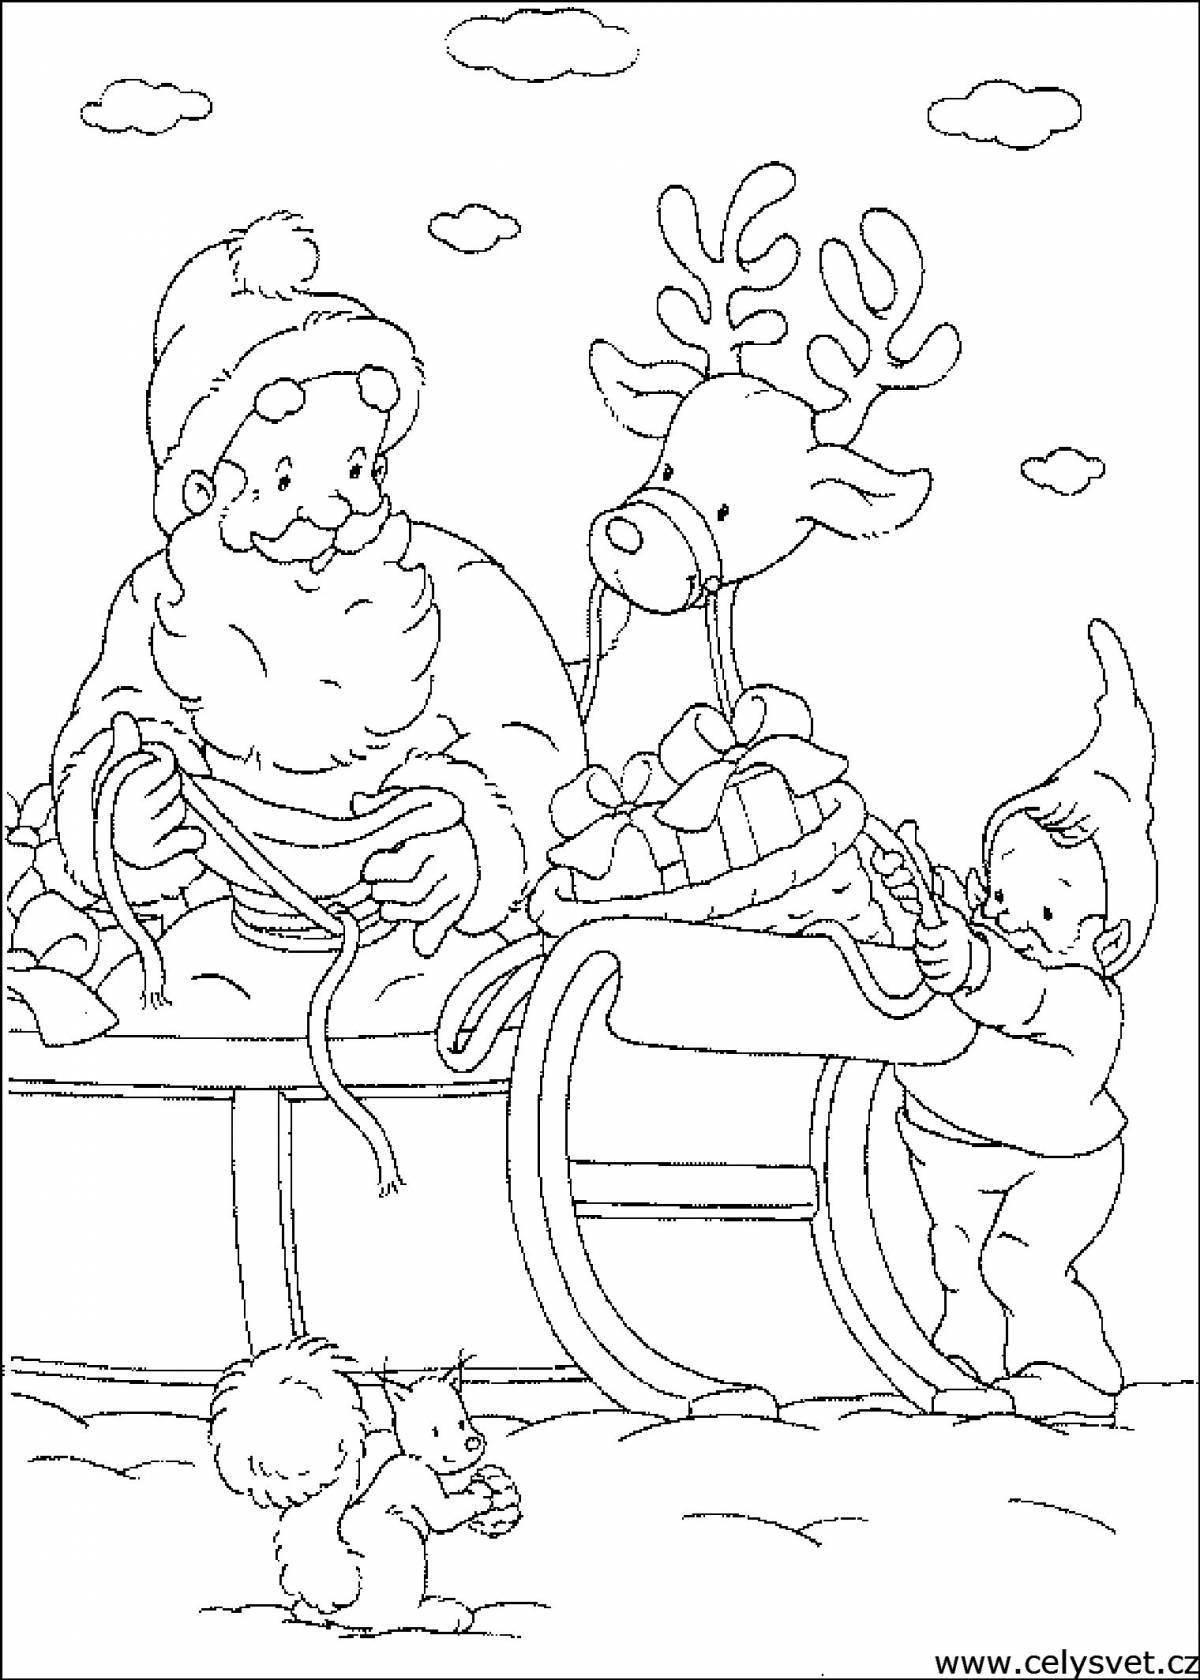 Exquisite Christmas fairy tale coloring book